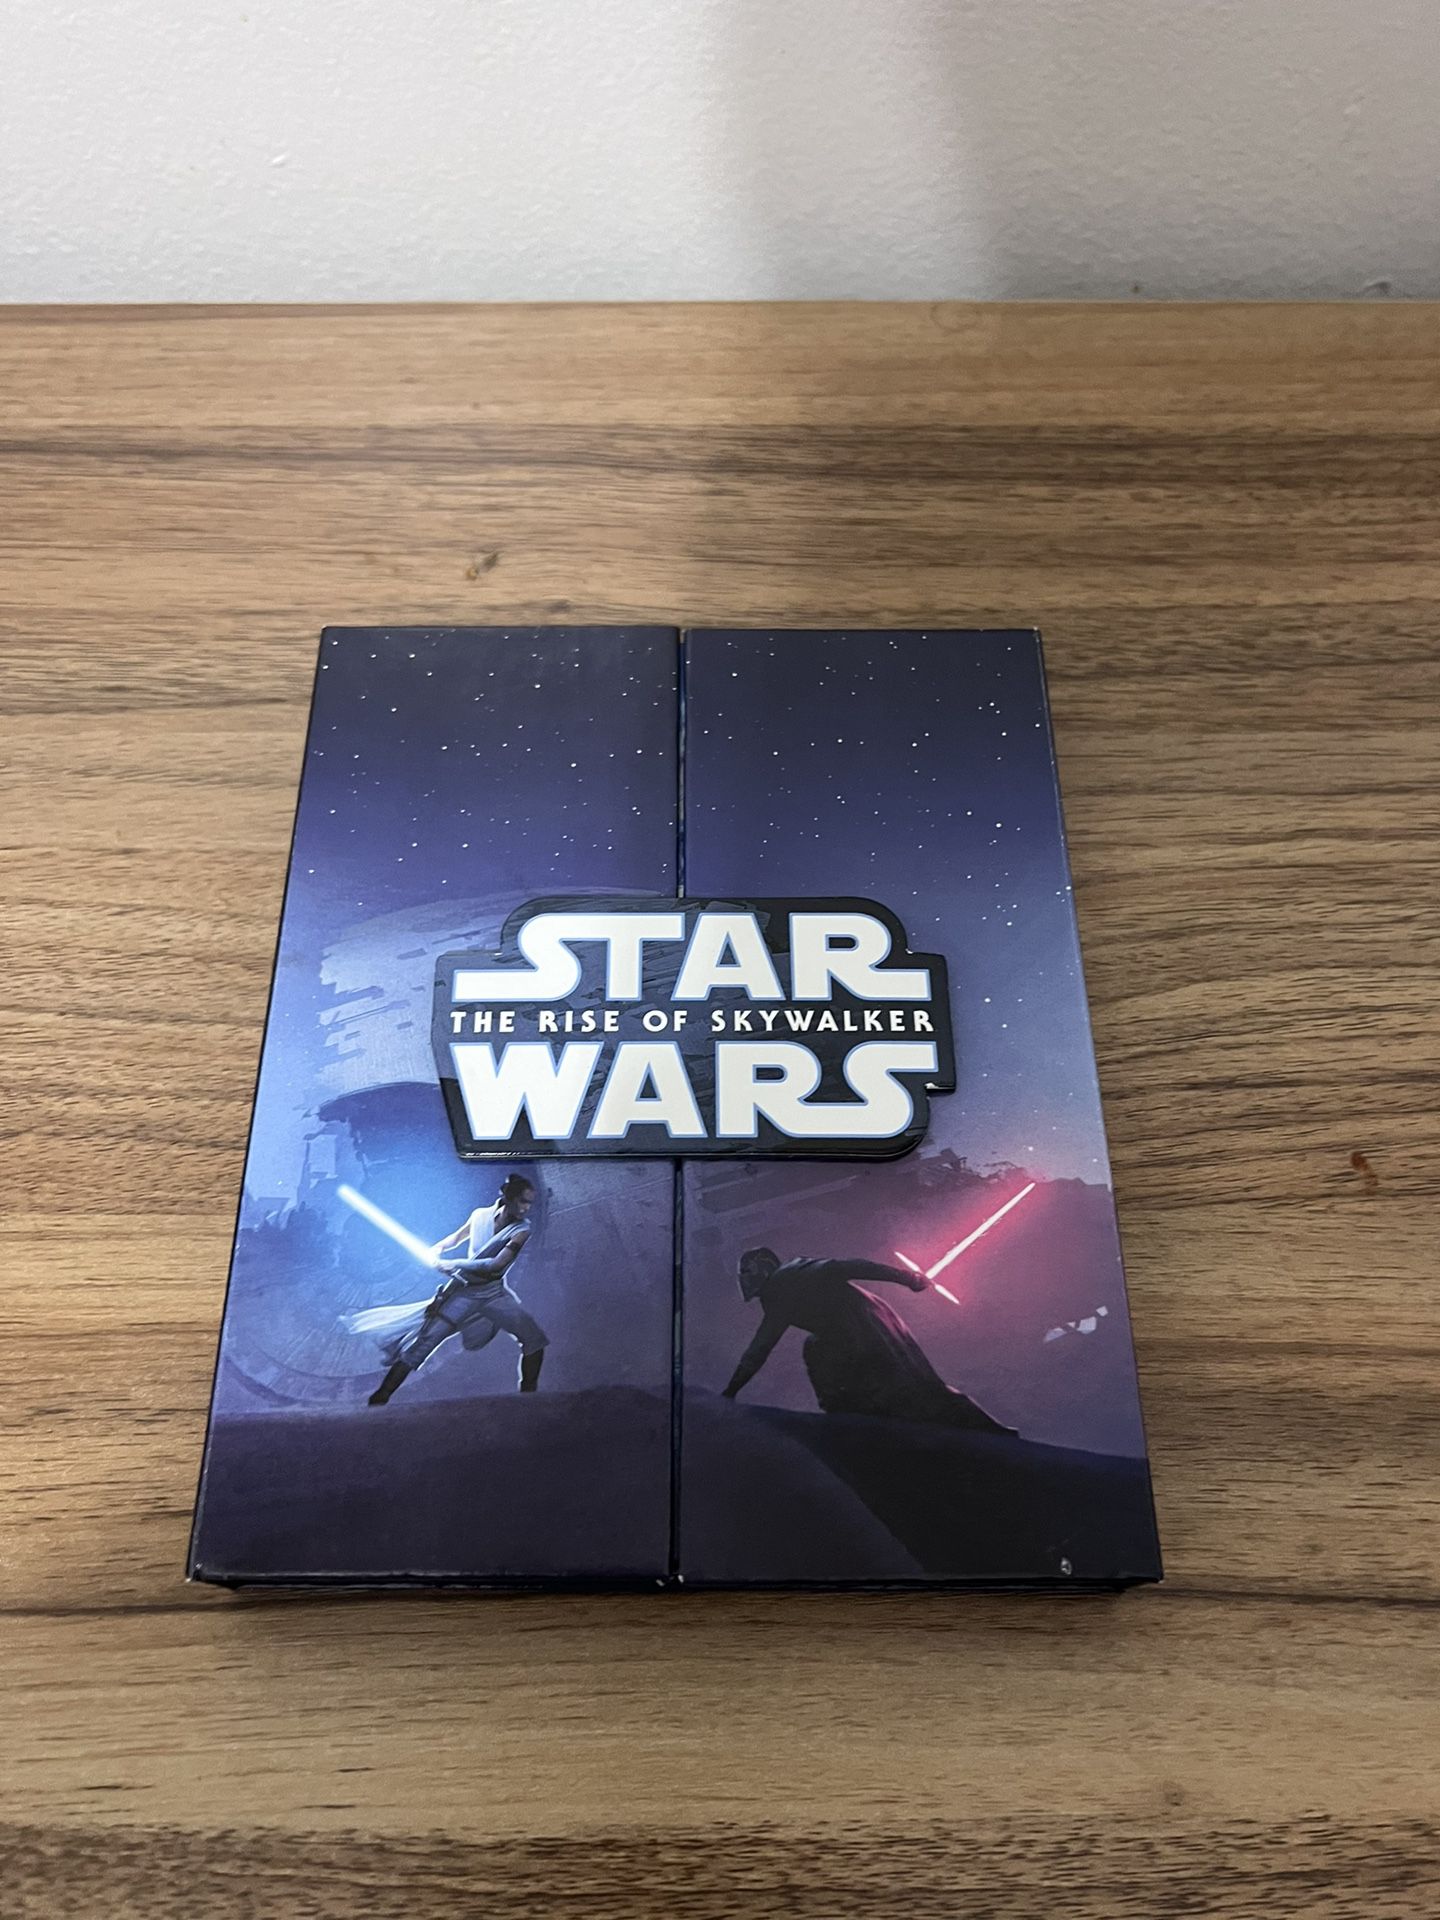 4K Blu Ray Star Wars Rise of Skywalker Limited Edition